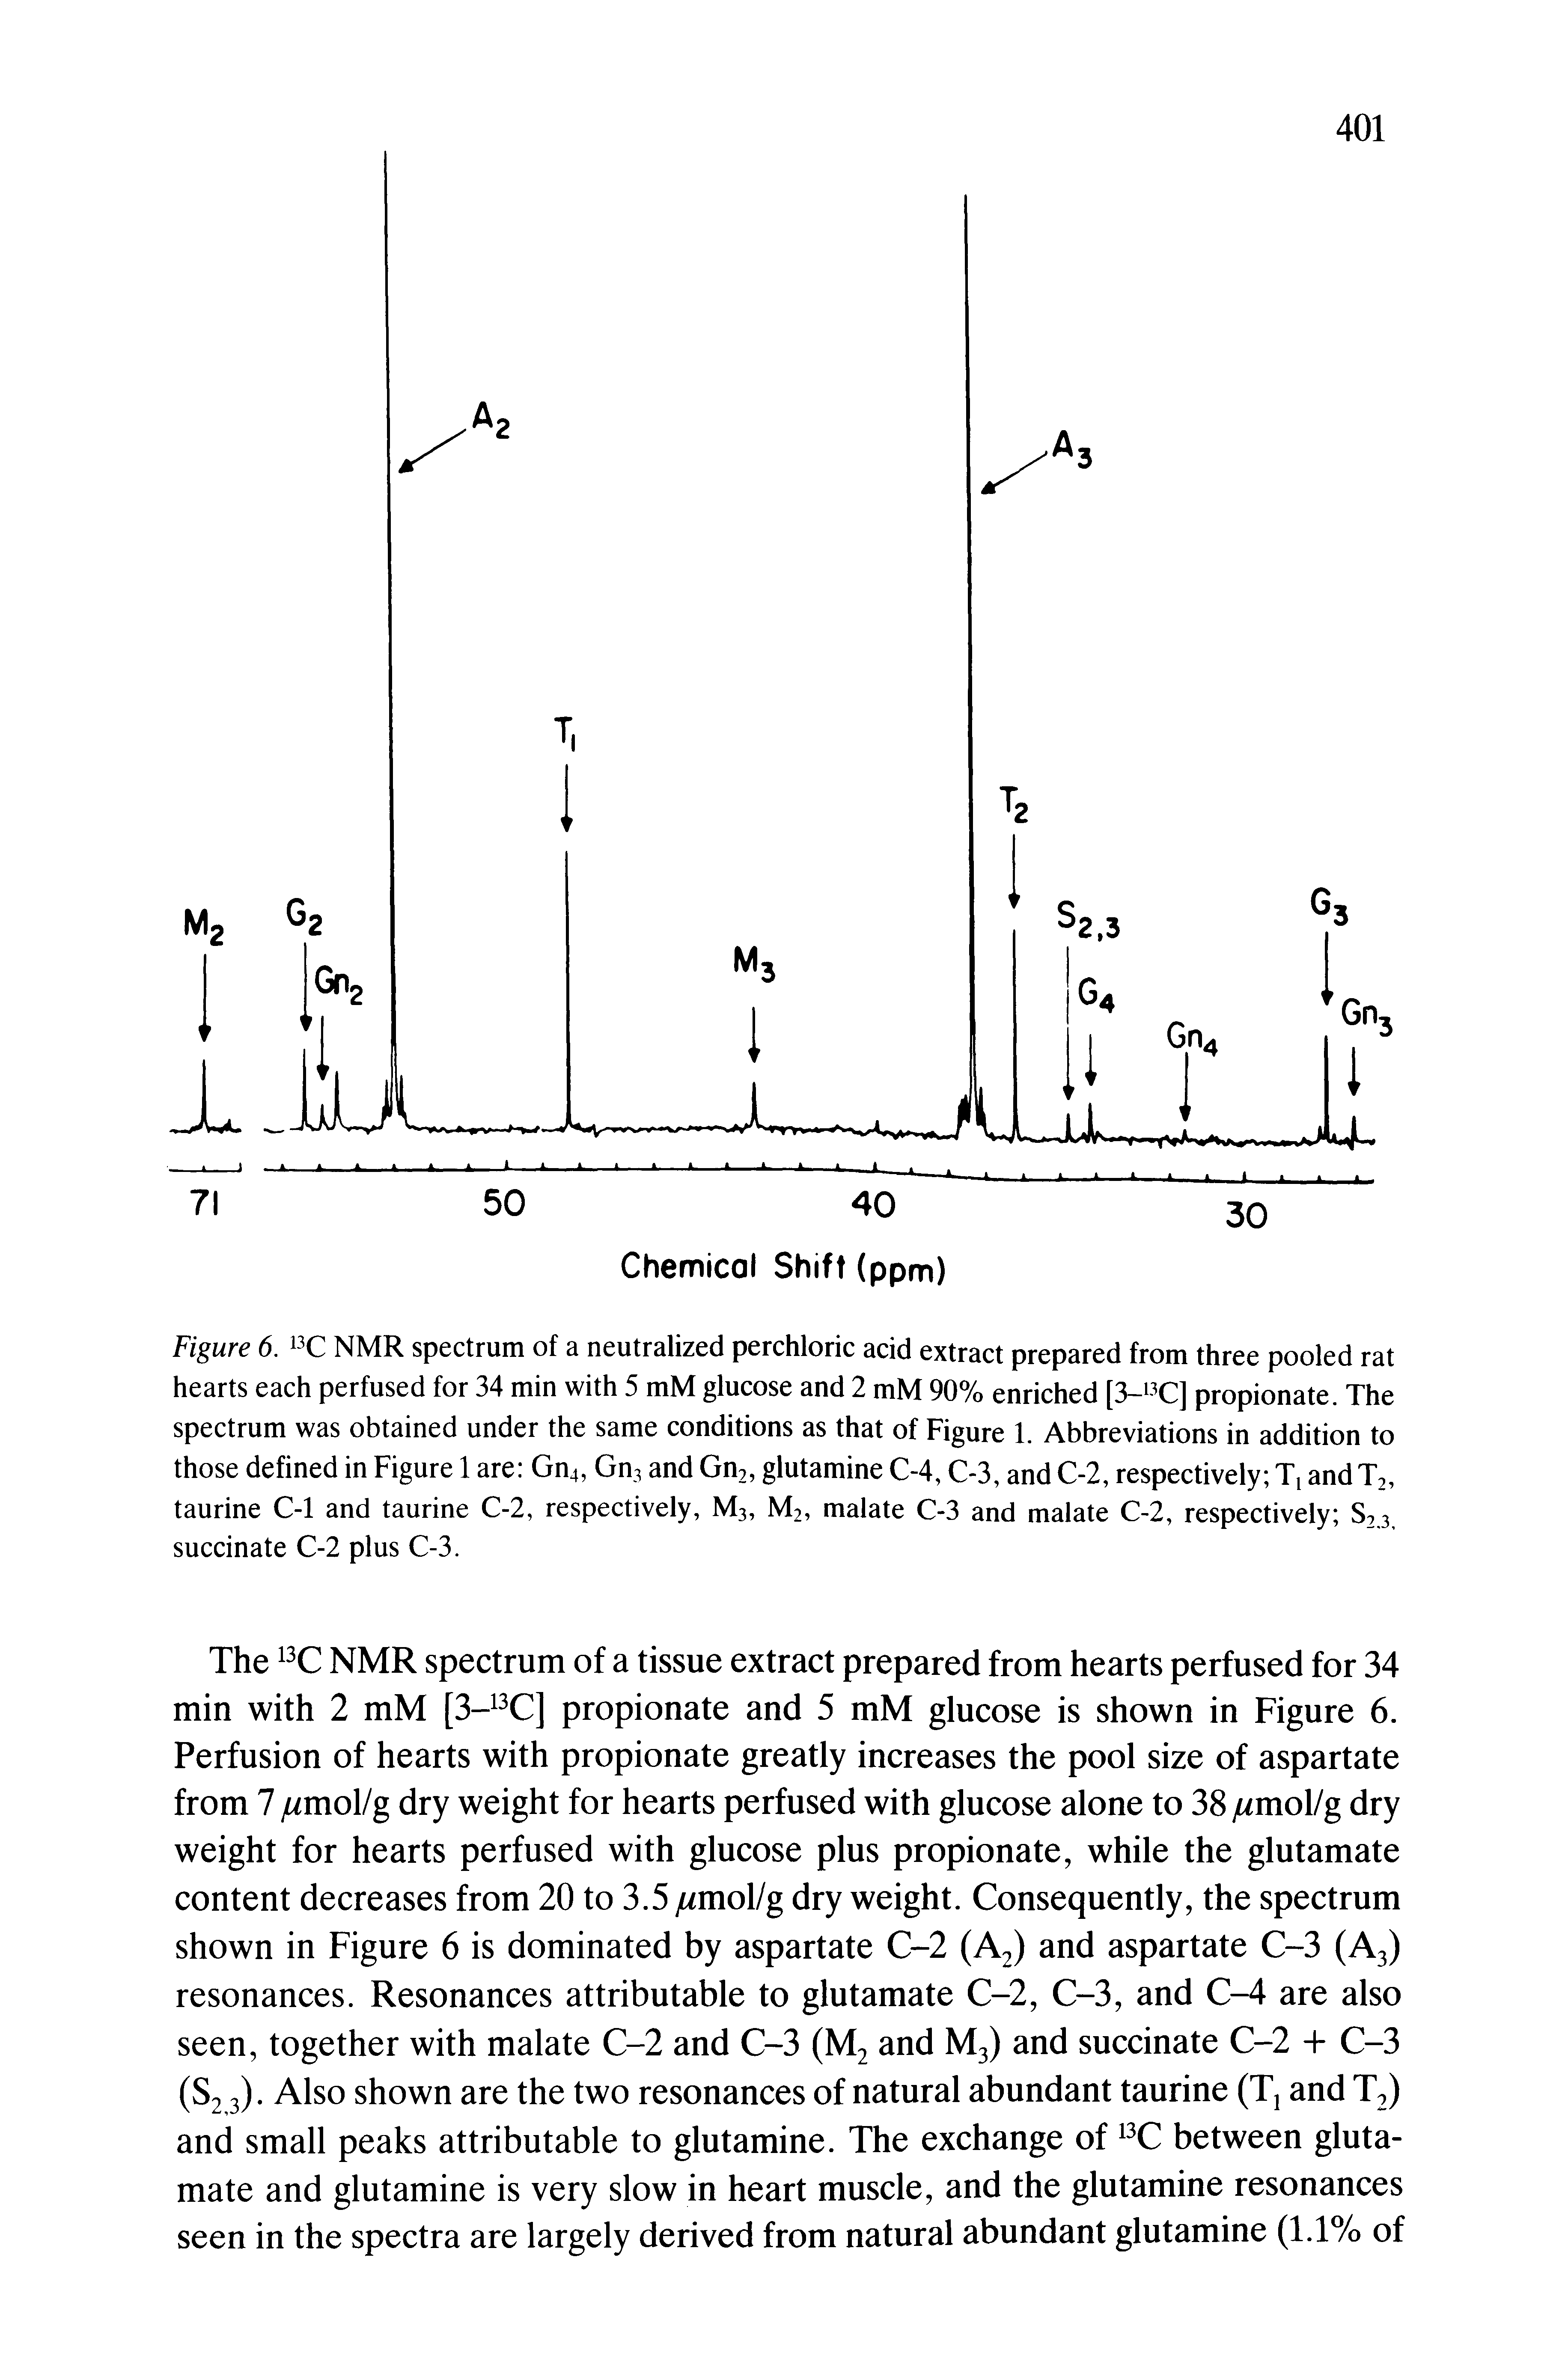 Figure 6. NMR spectrum of a neutralized perchloric acid extract prepared from three pooled rat hearts each perfused for 34 min with 5 mM glucose and 2 mM 90% enriched [3- C] propionate. The spectrum was obtained under the same conditions as that of Figure 1. Abbreviations in addition to those defined in Figure 1 are Gn4, Gnj and Gn2, glutamine C-4, C-3, and C-2, respectively T, andT2, taurine C-1 and taurine C-2, respectively, M3, M2, malate C-3 and malate C-2, respectively 87,3. succinate C-2 plus C-3.